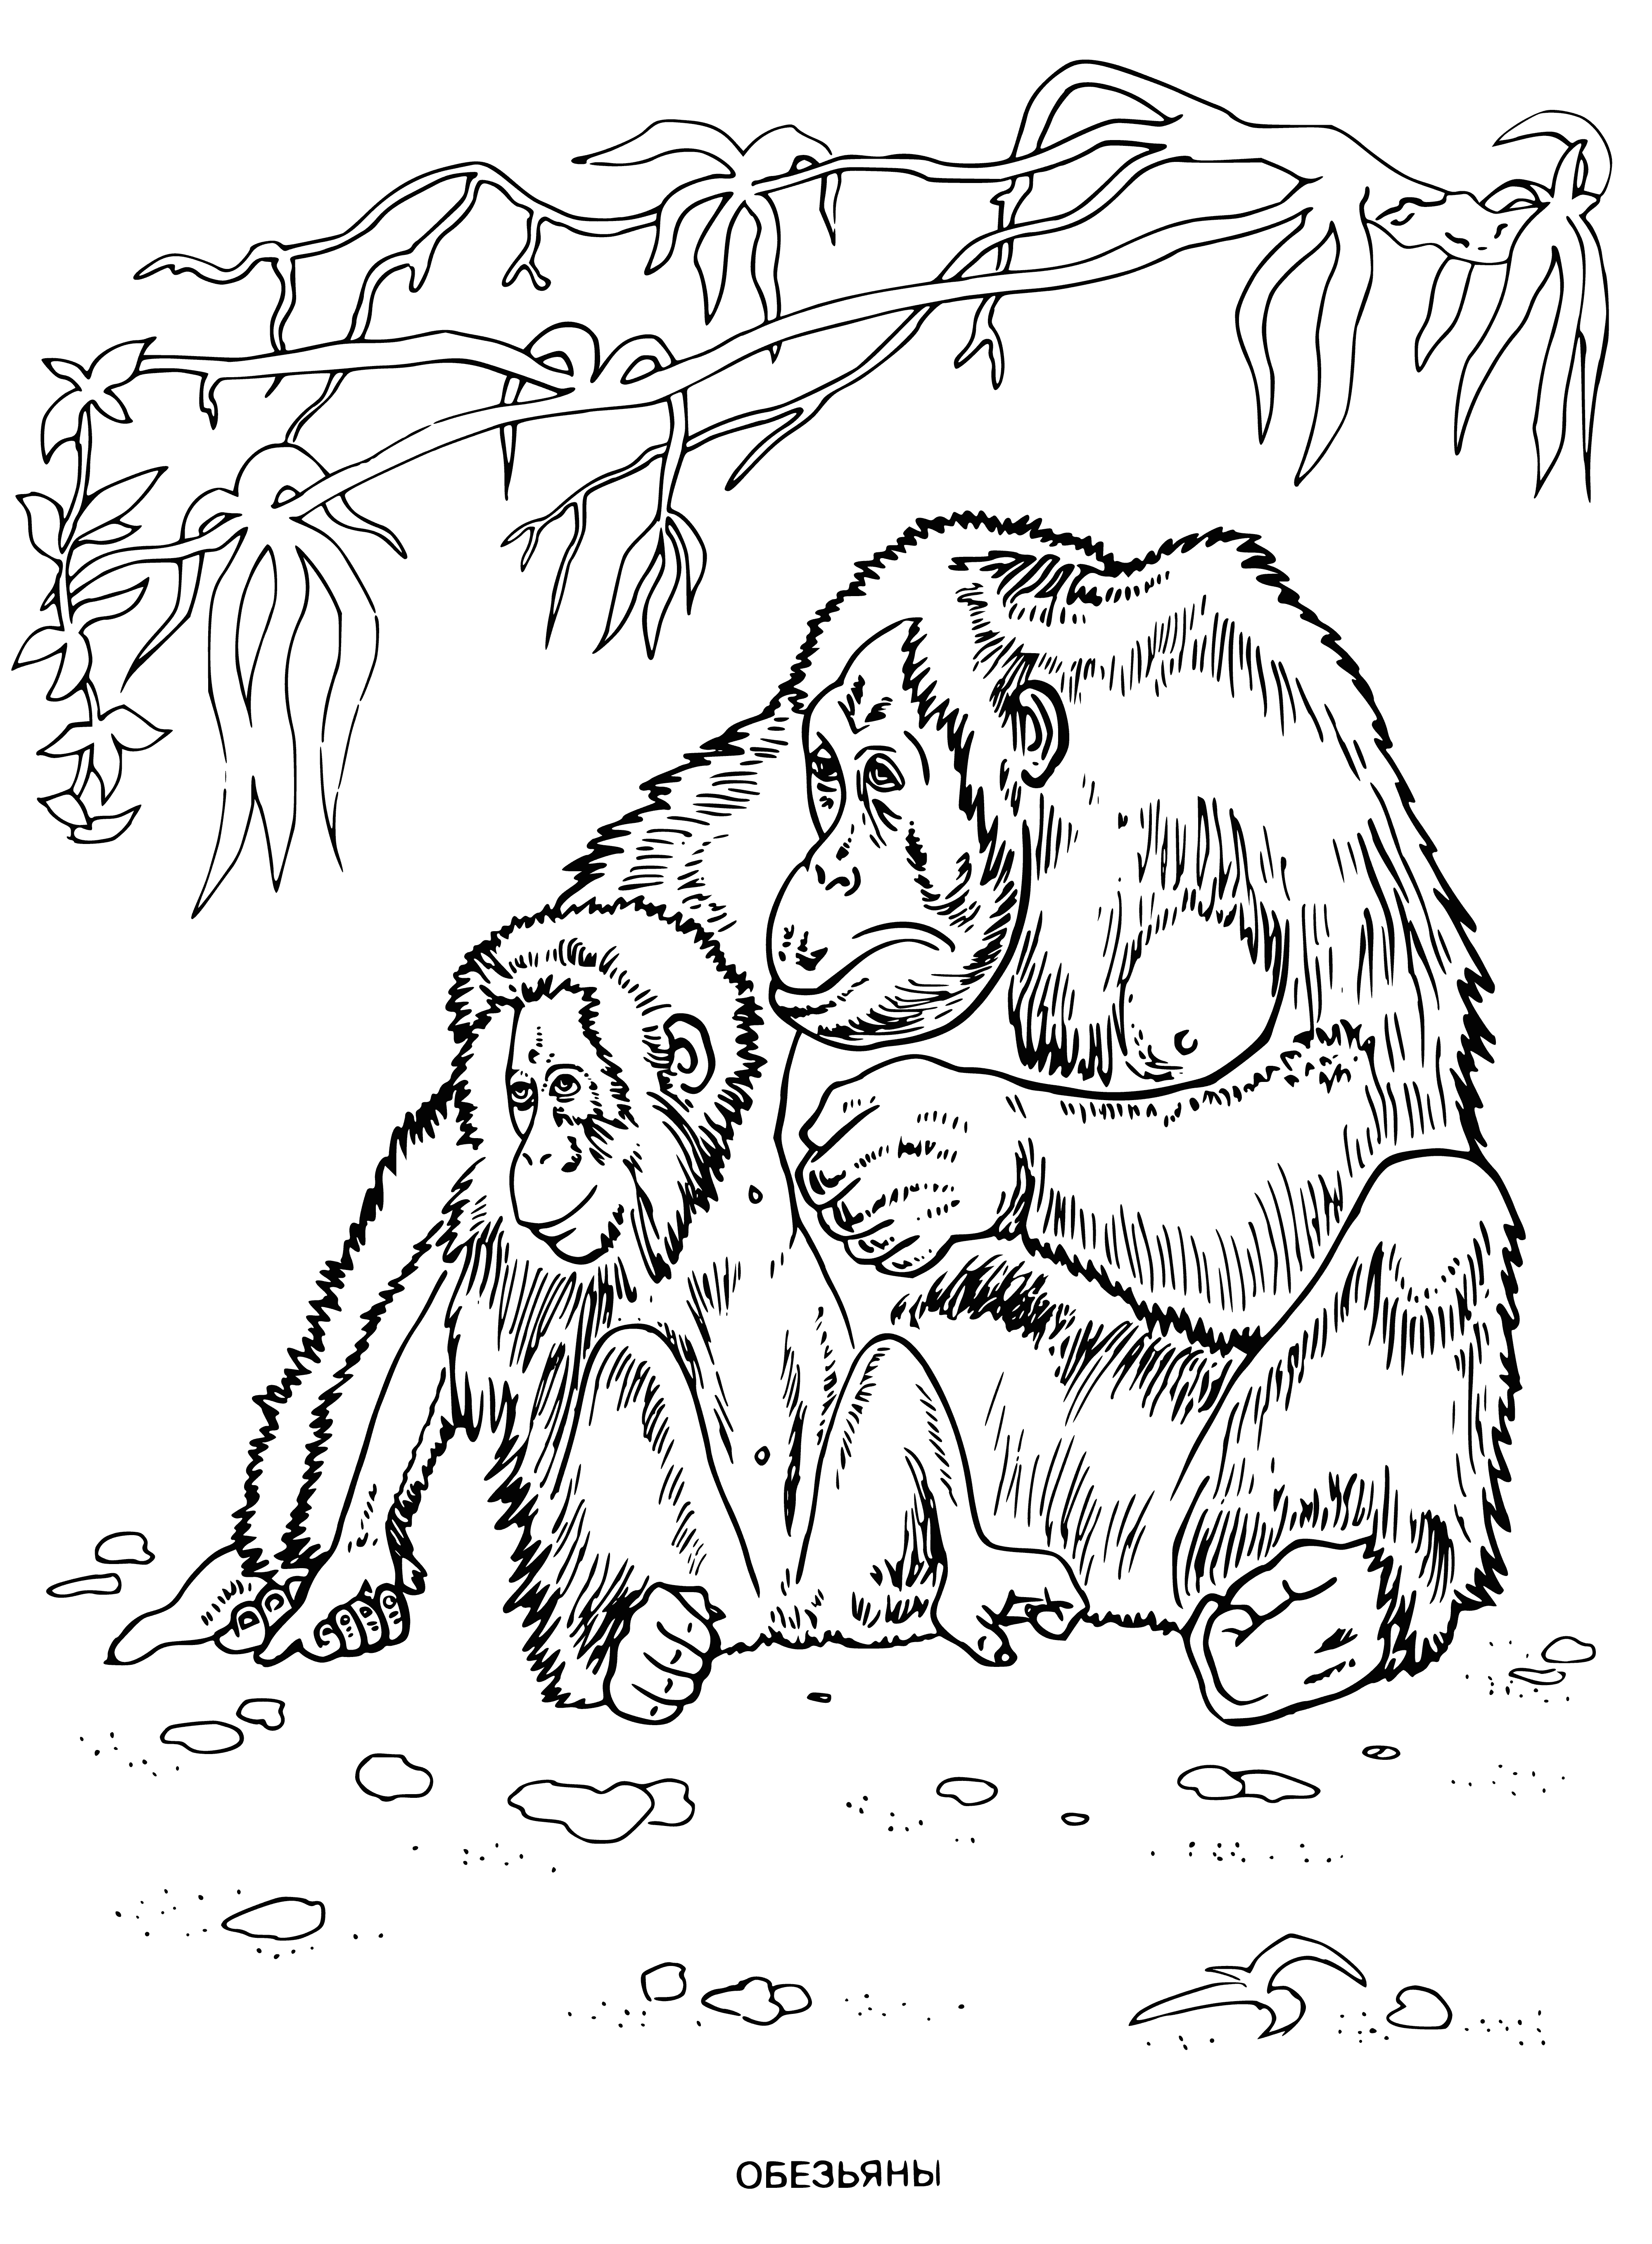 Monkey coloring page